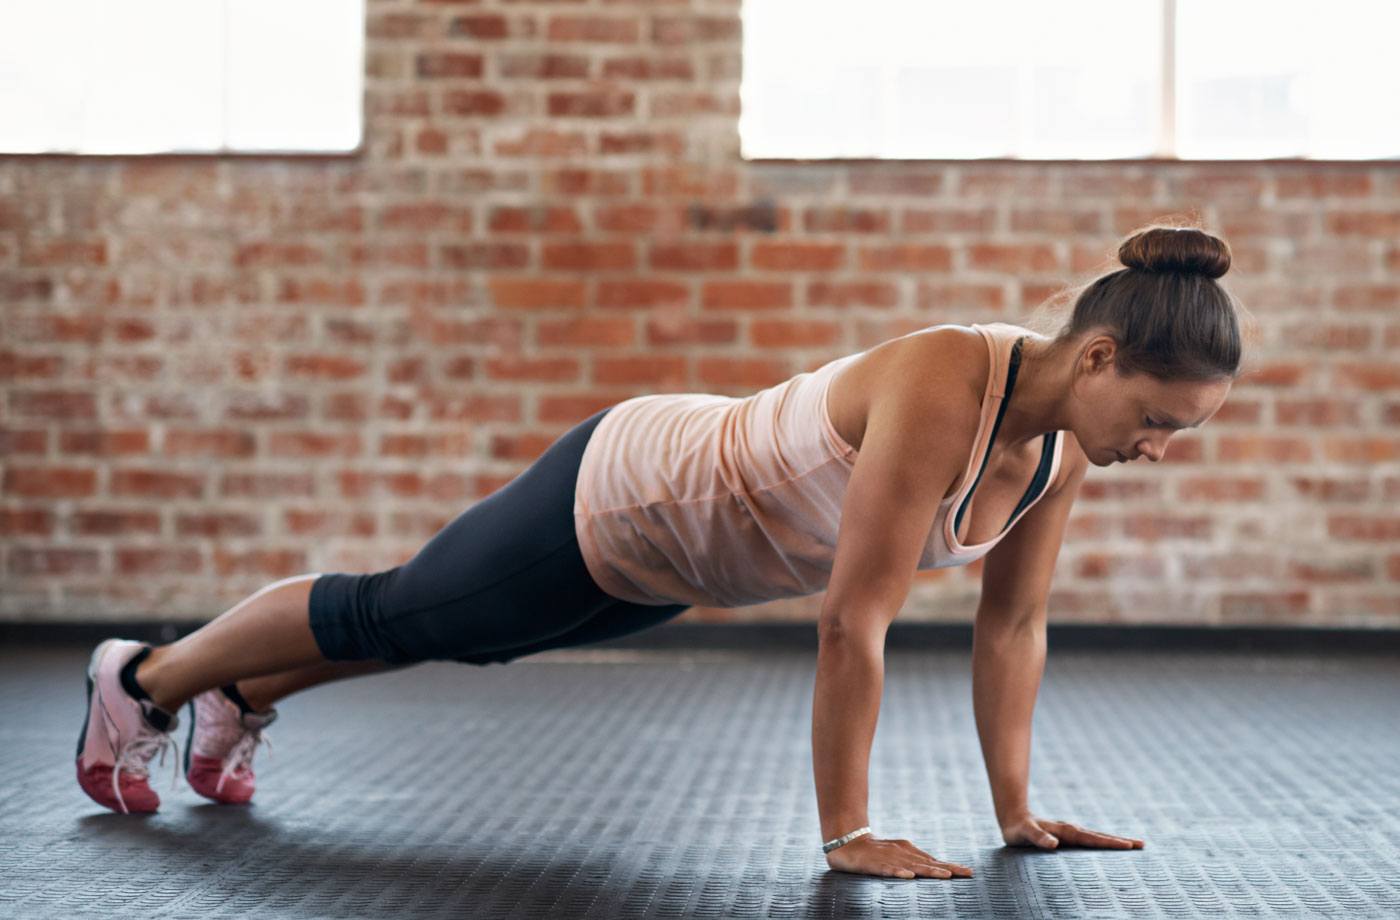 We found a tough plyo push-up for a full-body workout